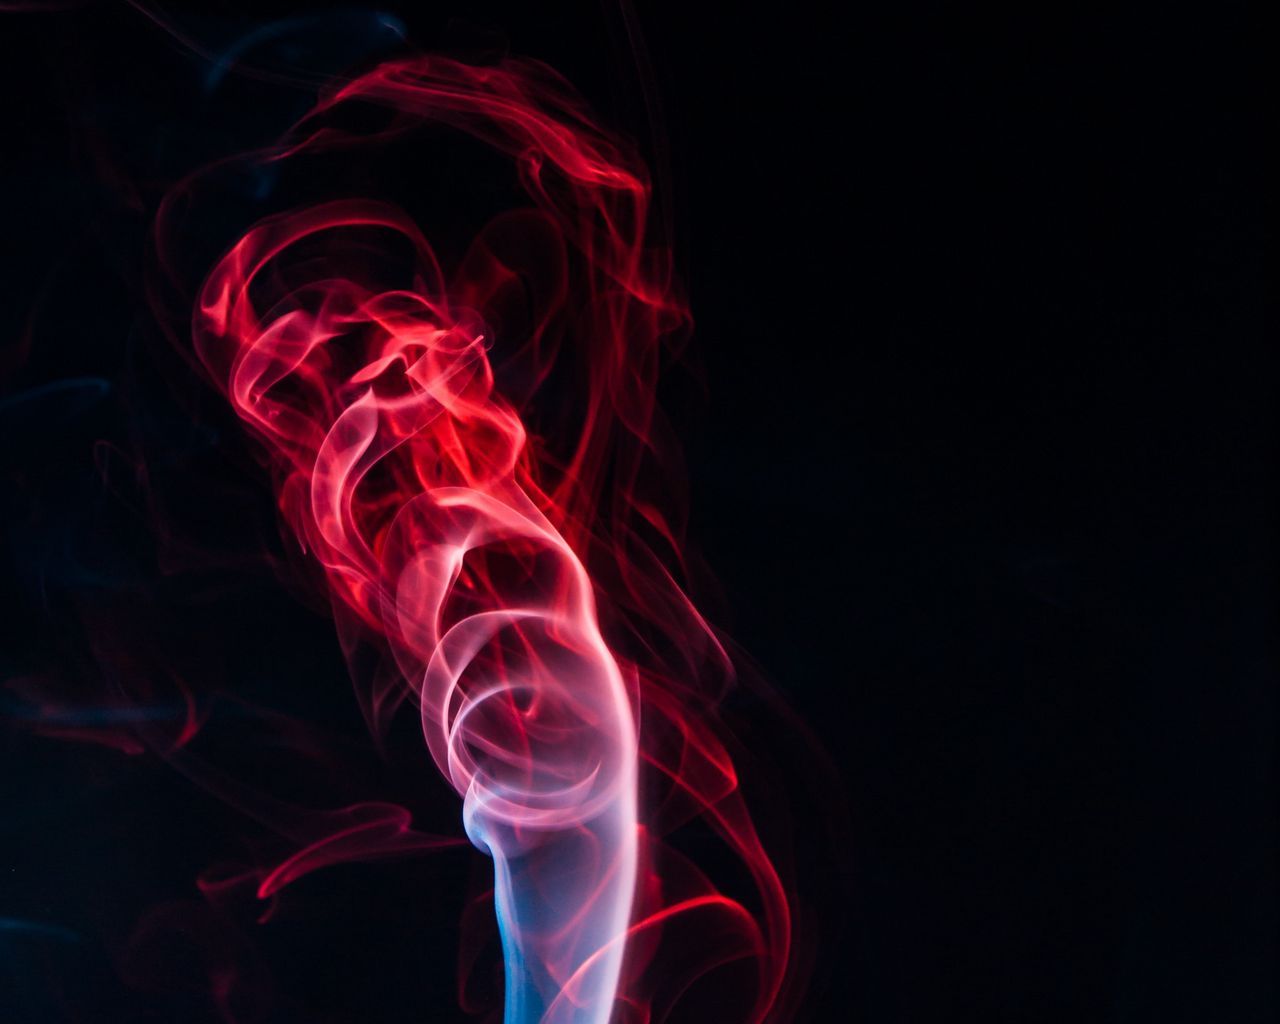 Download wallpaper 1280x1024 colored smoke, shroud, bunches, red, black standard 5:4 HD background